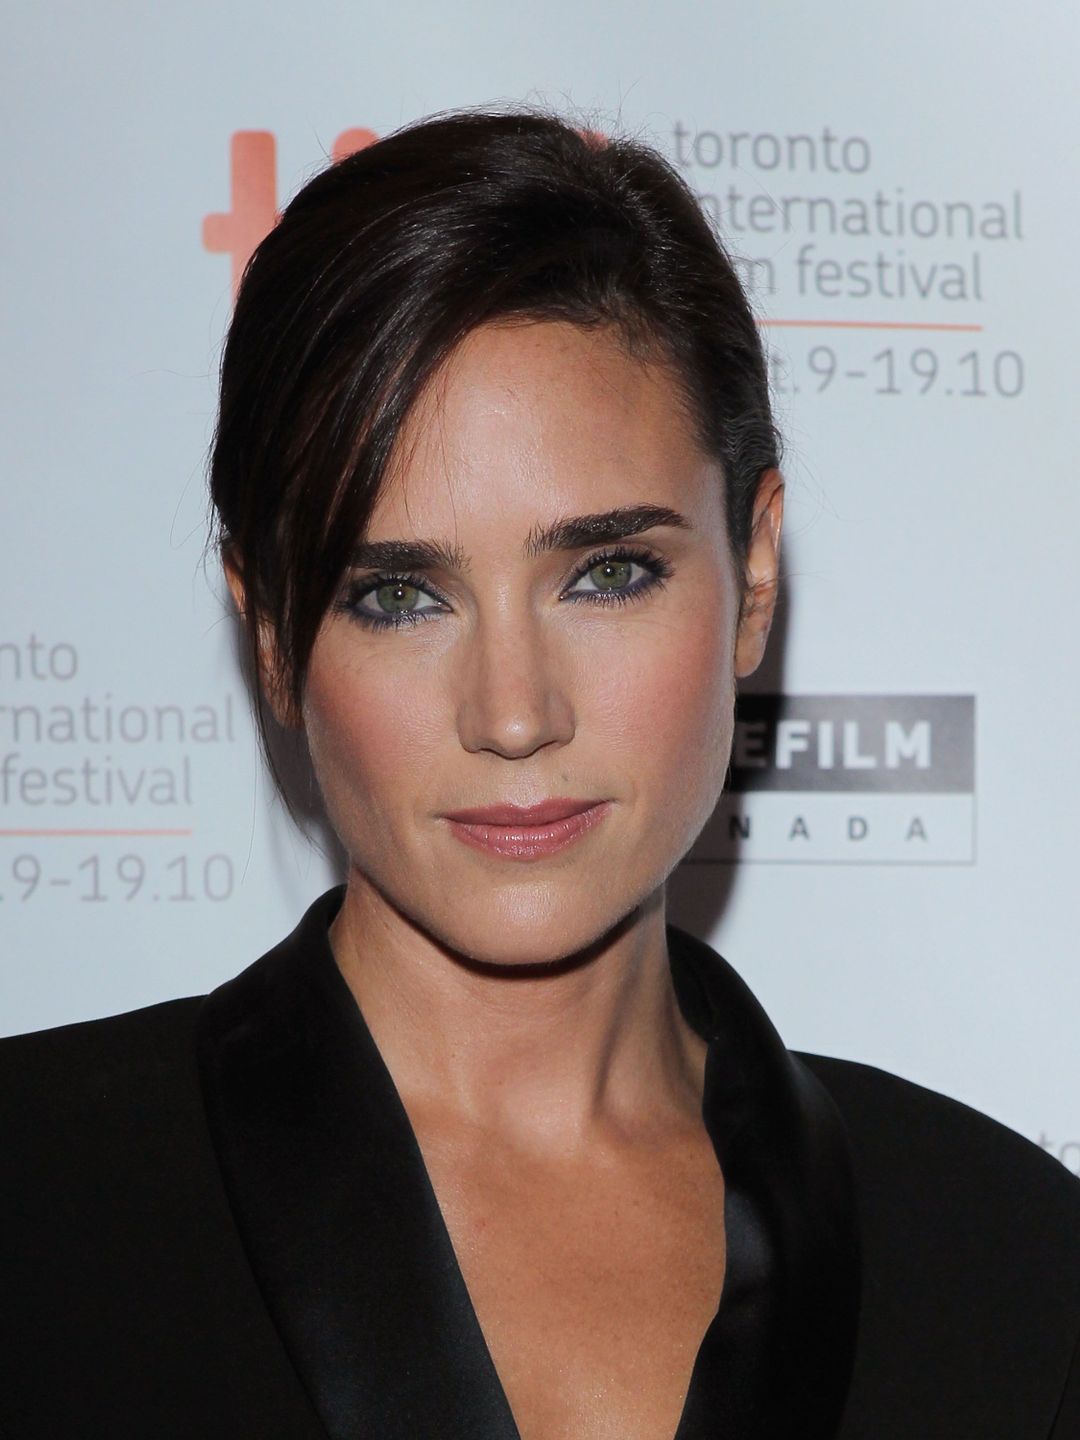 Jennifer Connelly early career